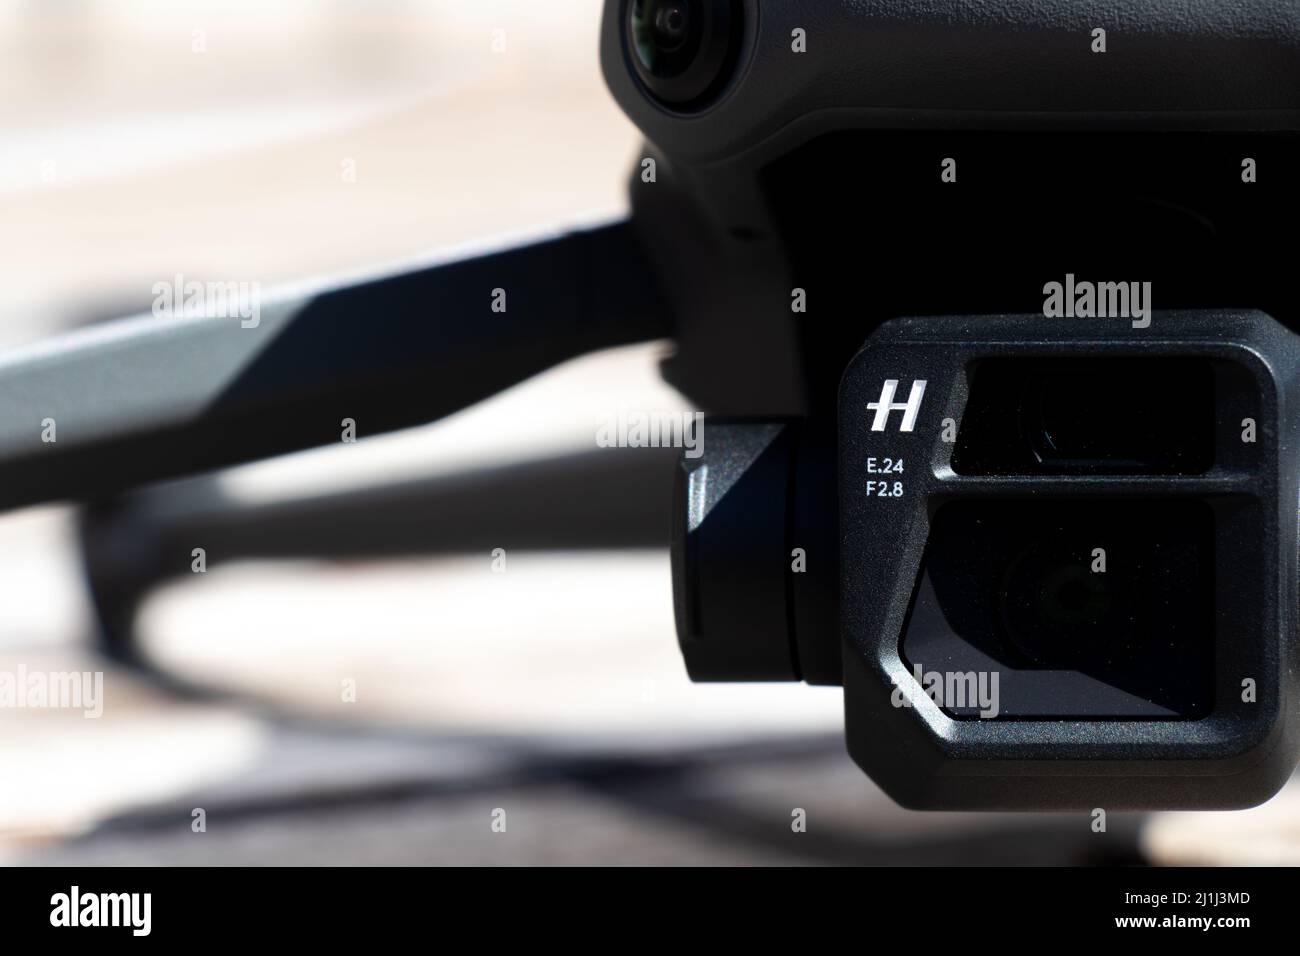 A close-up view of the Hasselblad logo on the front of the camera for the DJI Mavic 3, a high-tech, popular consumer drone. Stock Photo